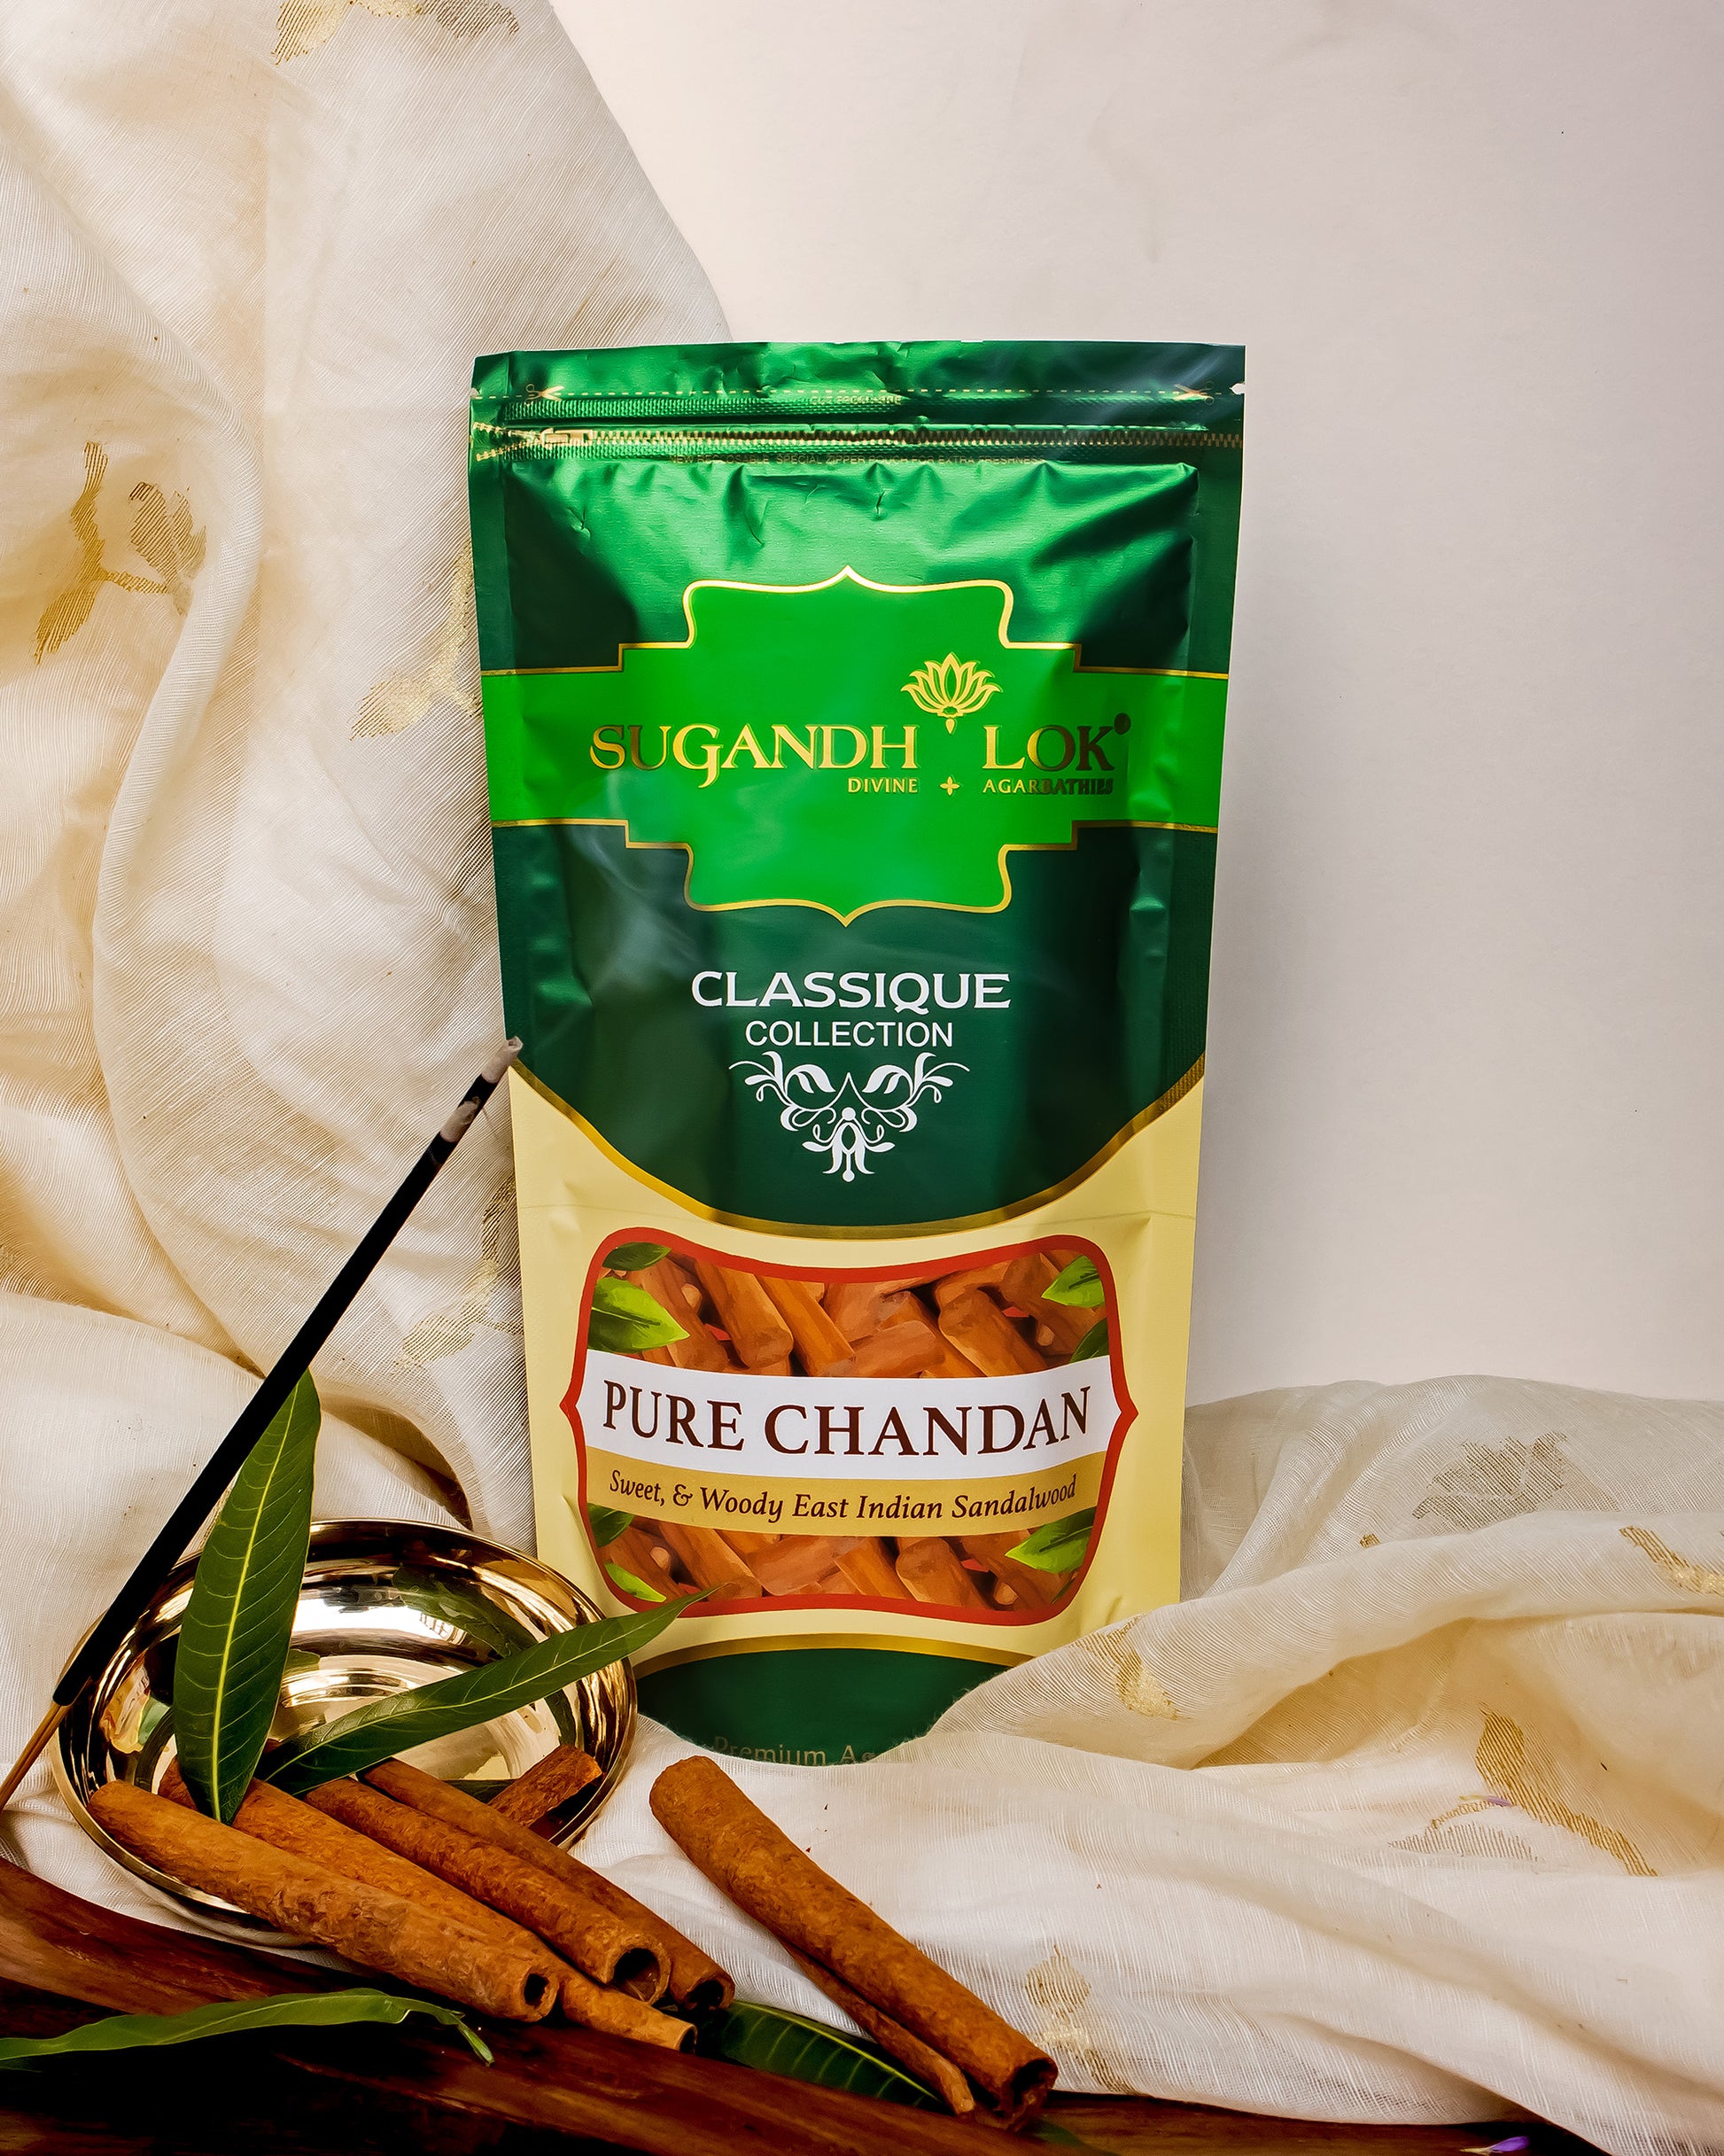 Pure Chandan Agarbatti Pouch placed on table surrounded by chandan sticks and leaves